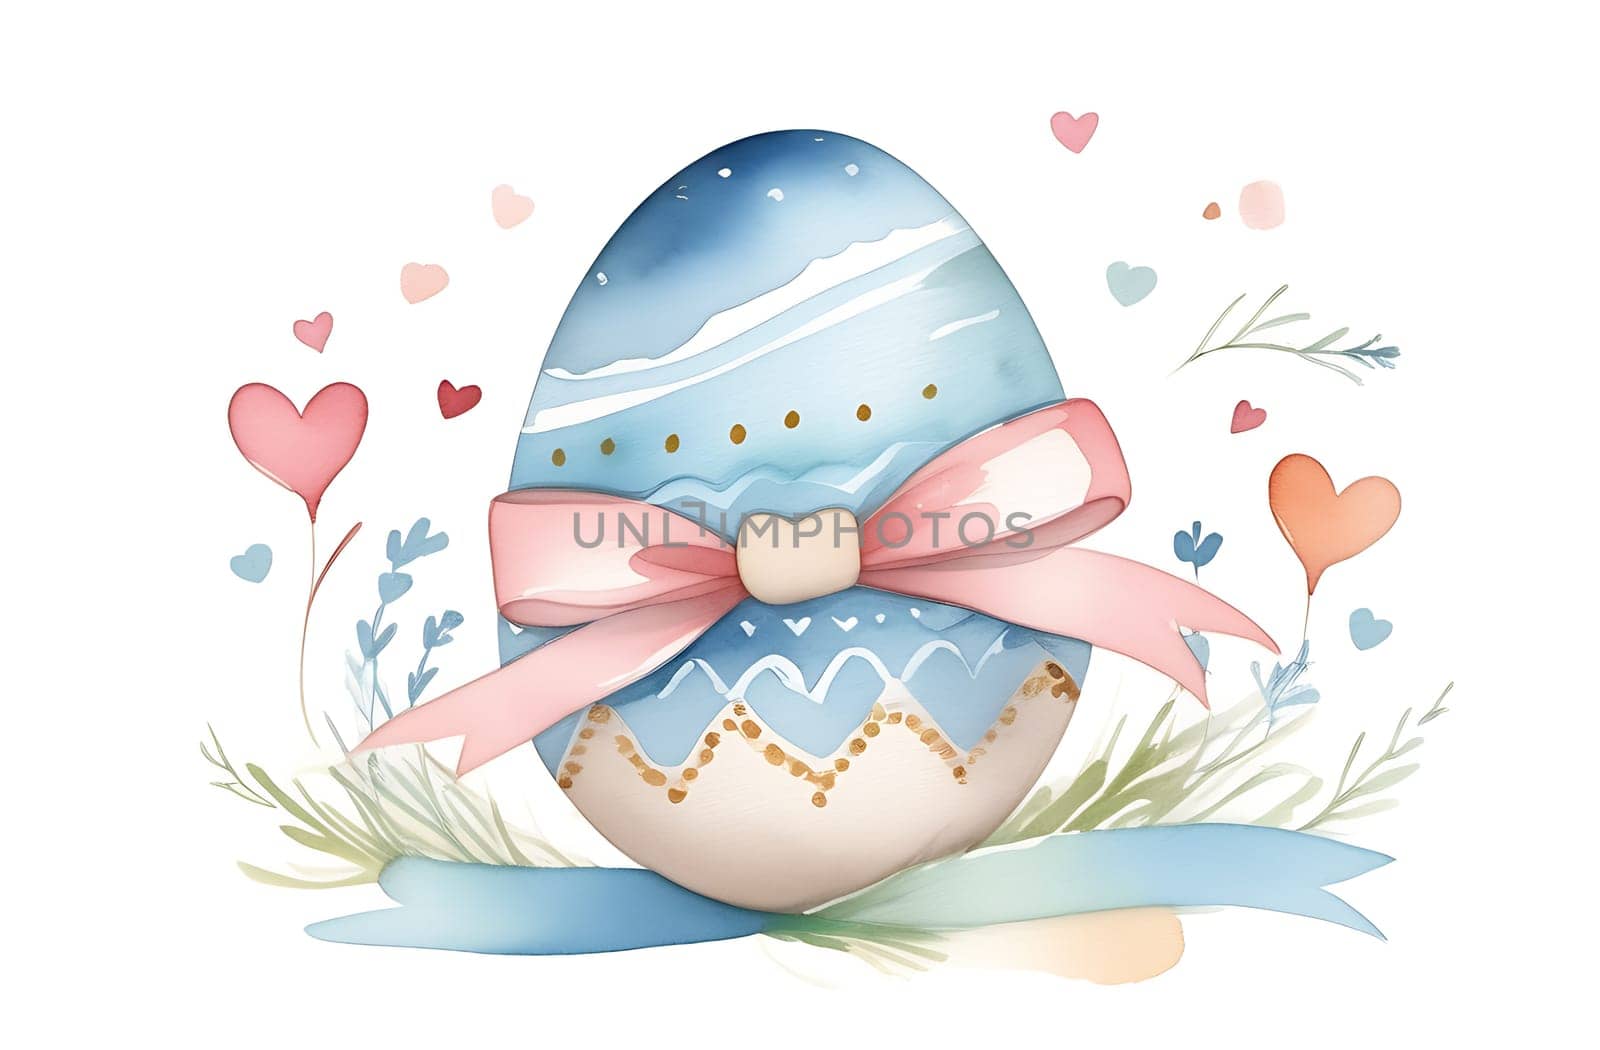 One Easter egg tied with a pink bow in watercolor painting technique, isolated on a white background, pastel color scheme.